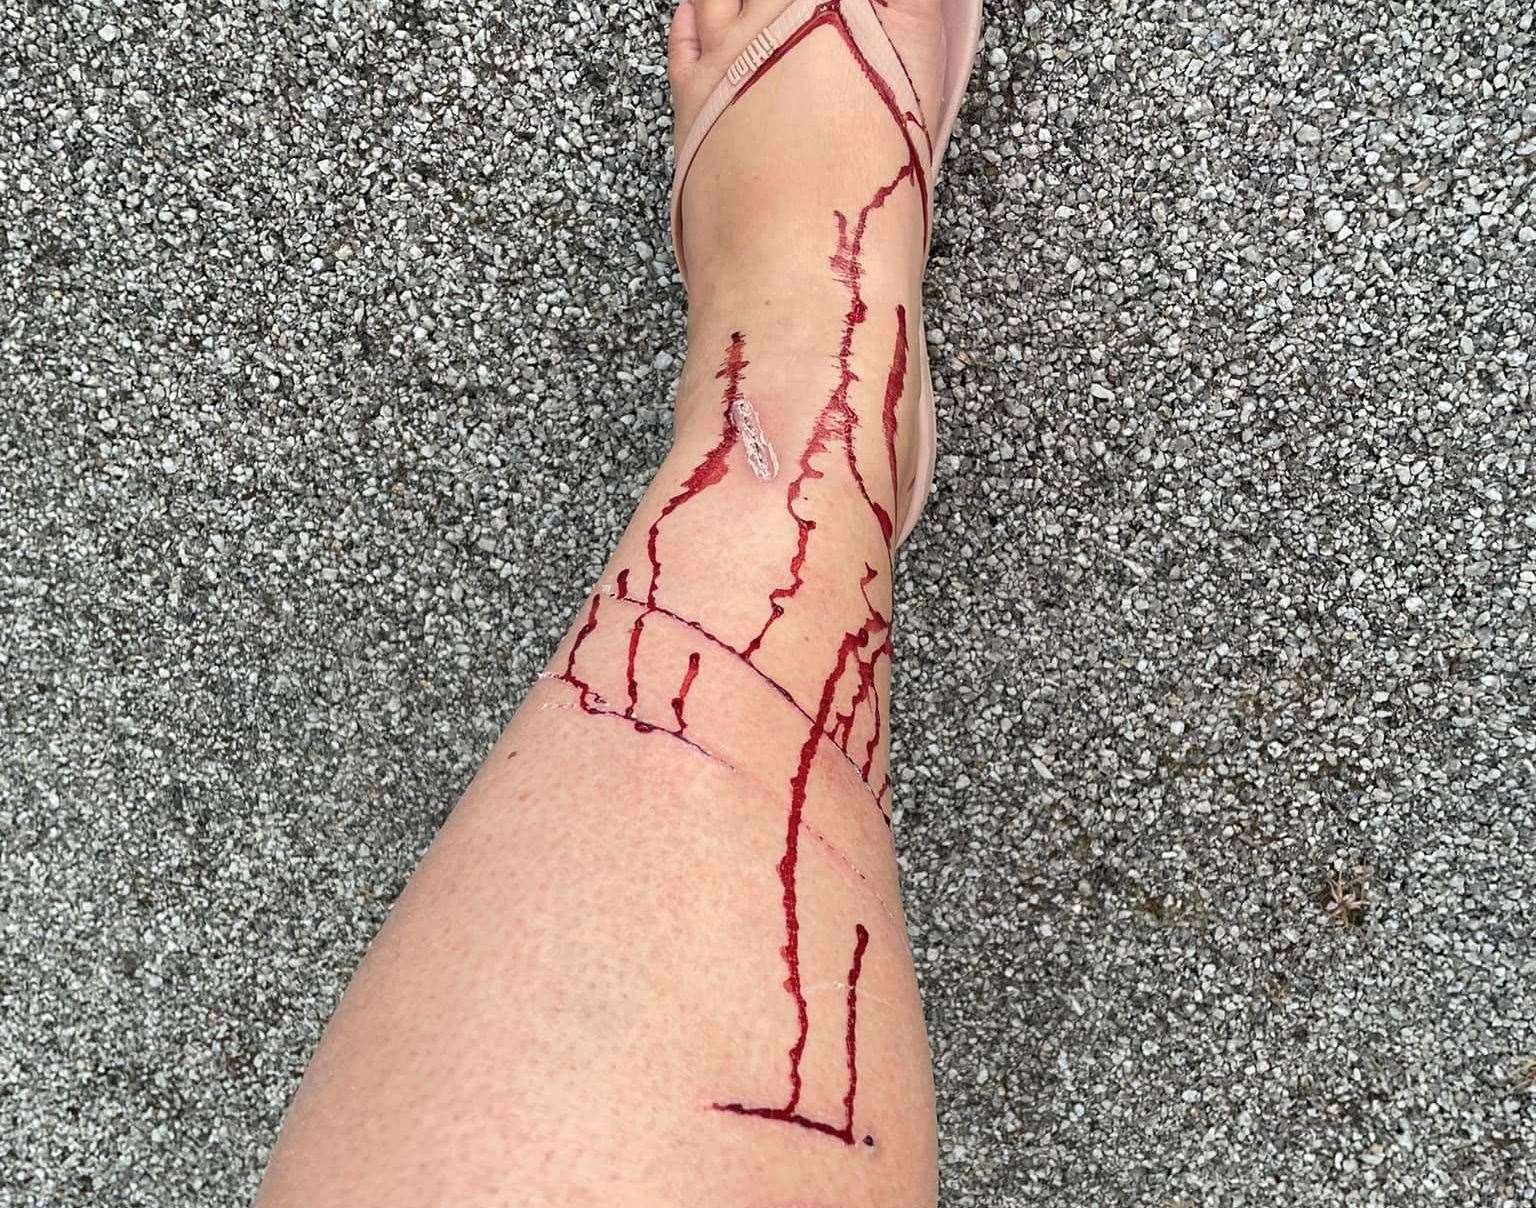 A woman was scratched by a cat on the leg while walking her dogs